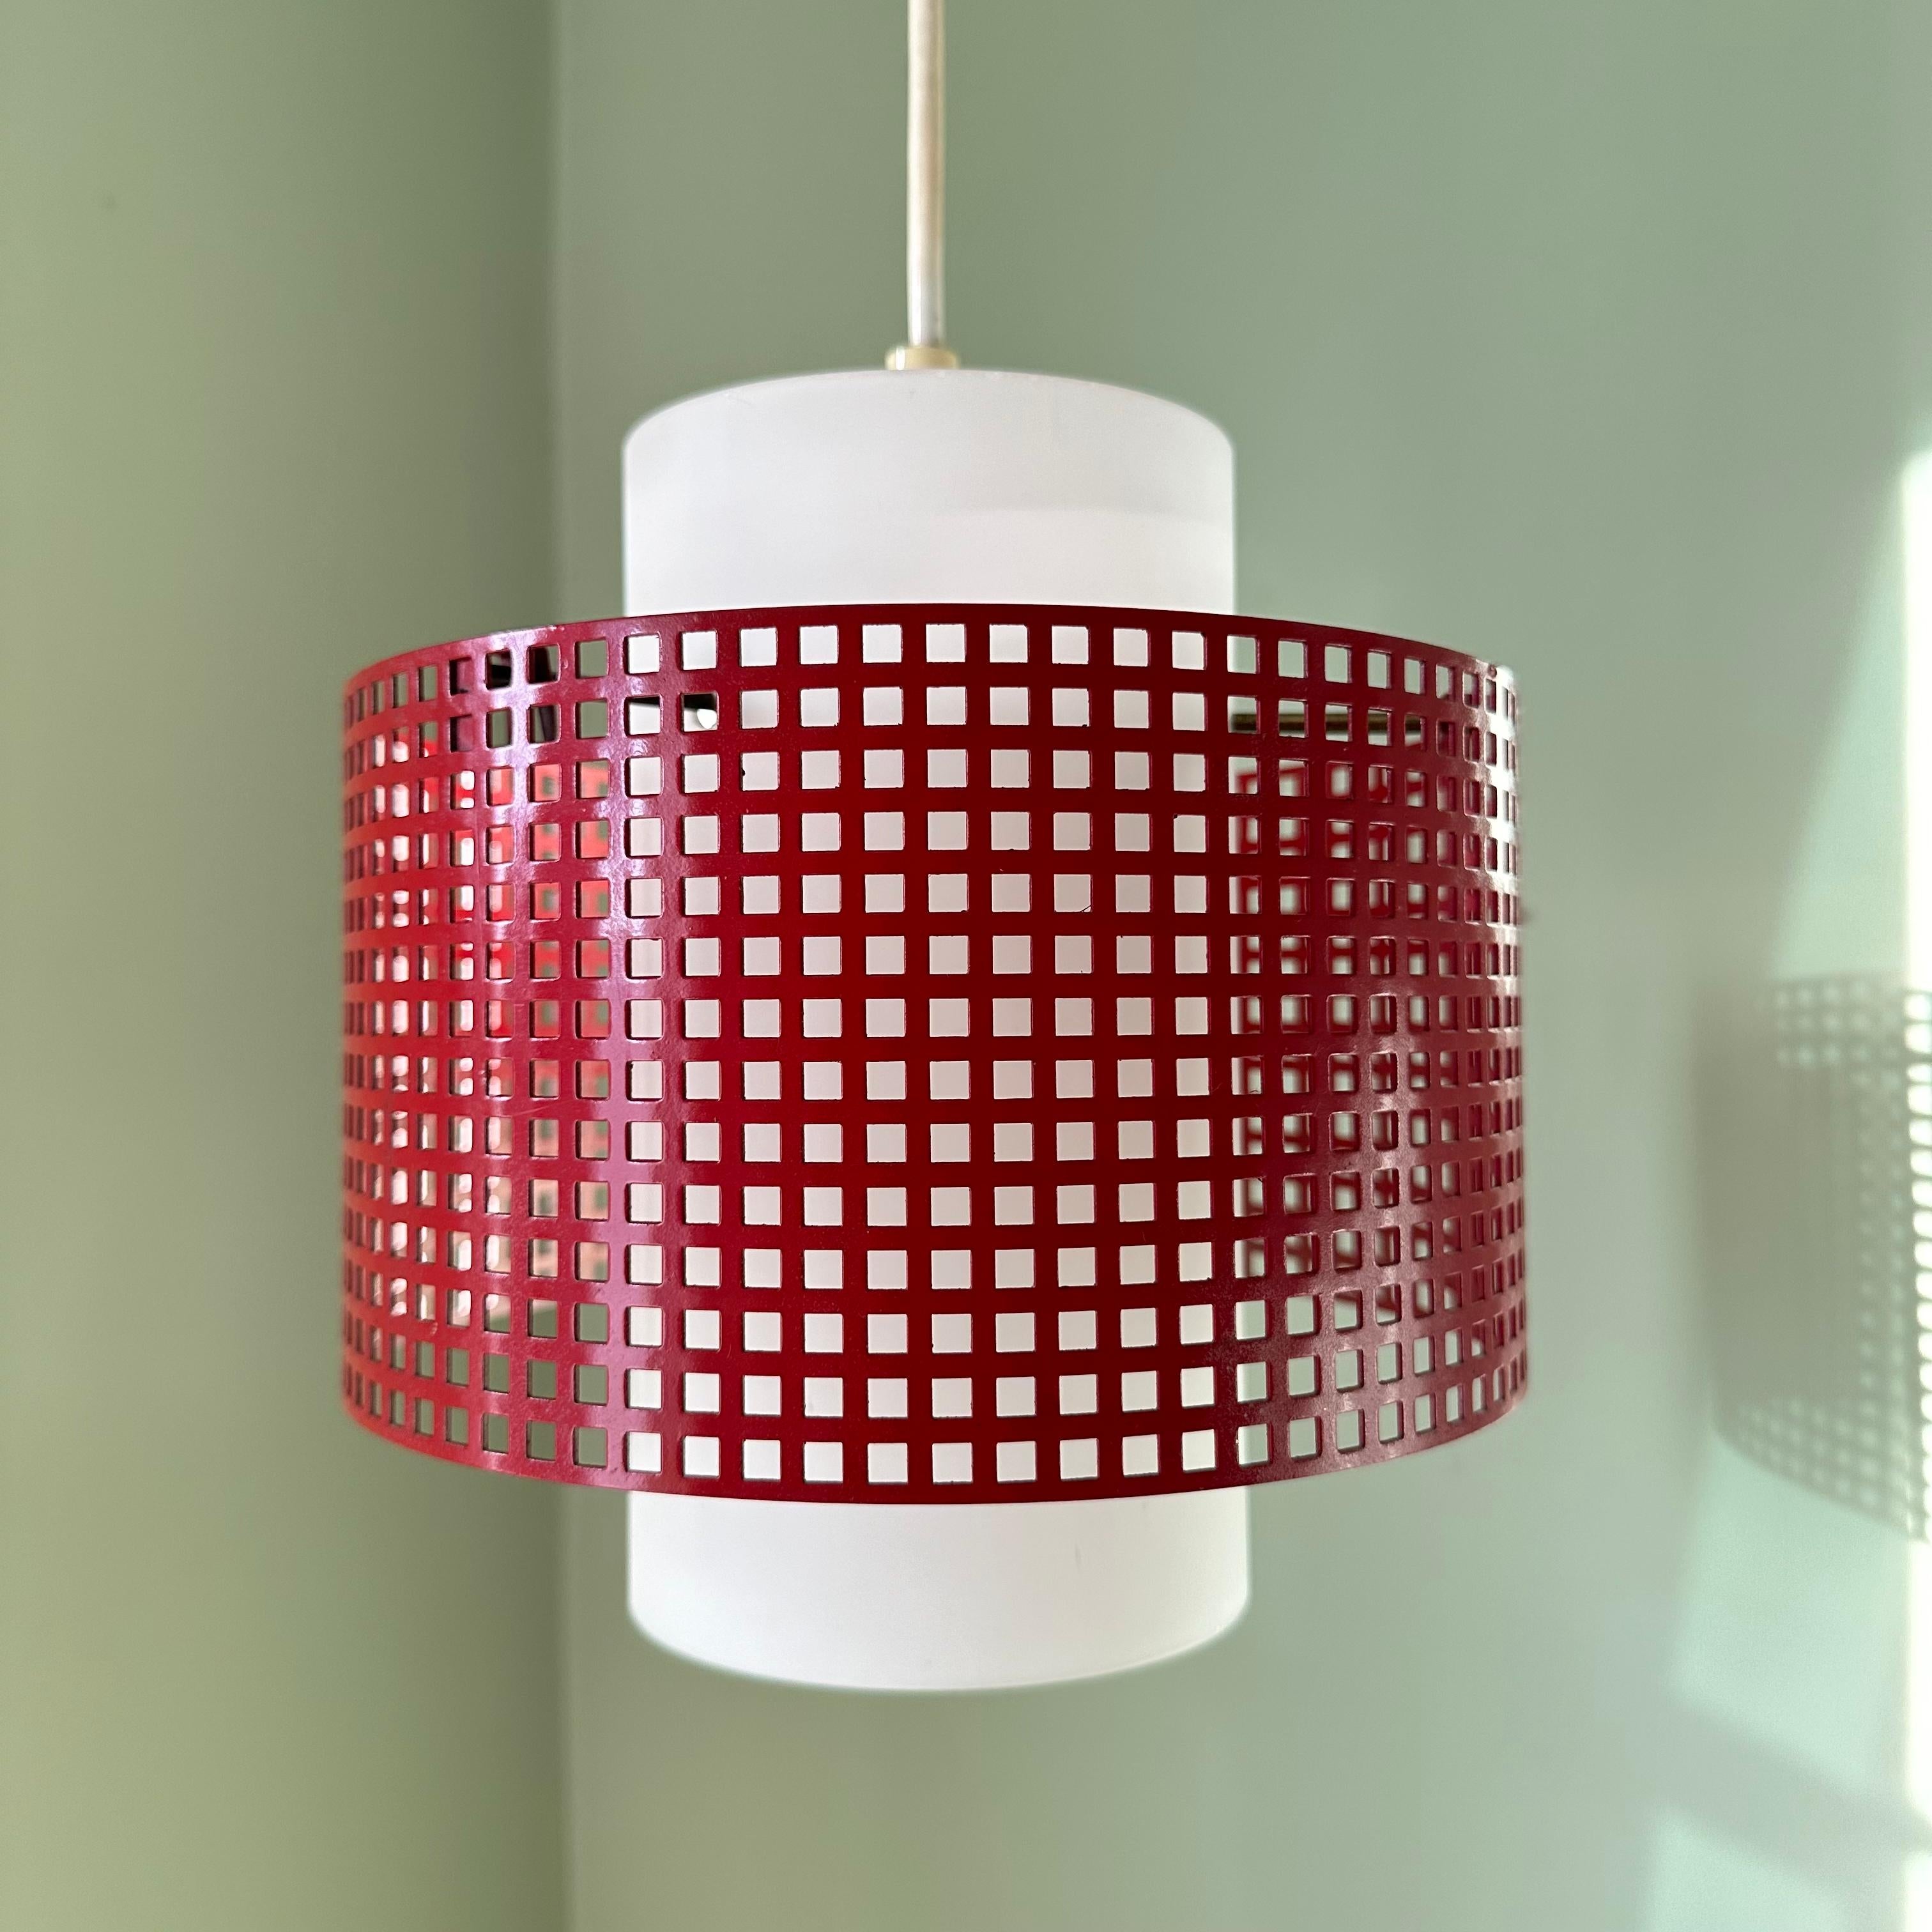 A vintage modernist or post-modern pendant ceiling light. A white glass cylinder diffuser shade floats inside a red painted metal ring, perforated into a grid or windowpane pattern. Suspended by brass rods, the red colored metal grid orbits around